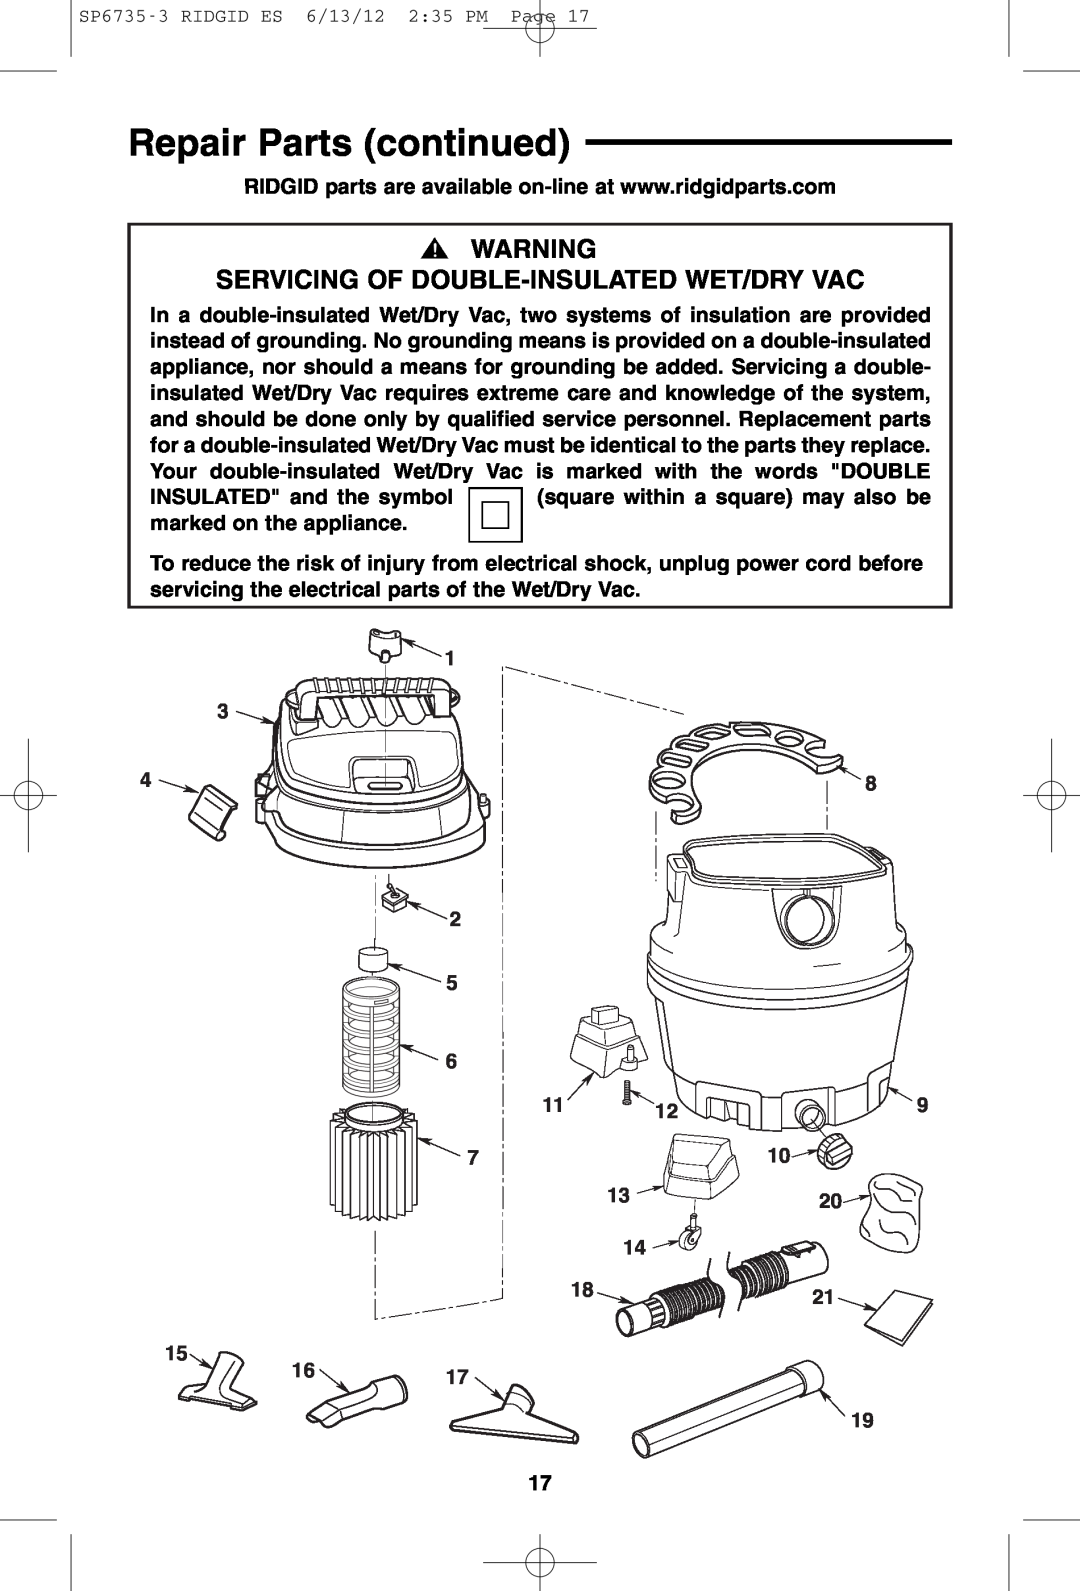 RIDGID WD14500 owner manual Repair Parts continued, Servicing Of Double-Insulatedwet/Dry Vac 